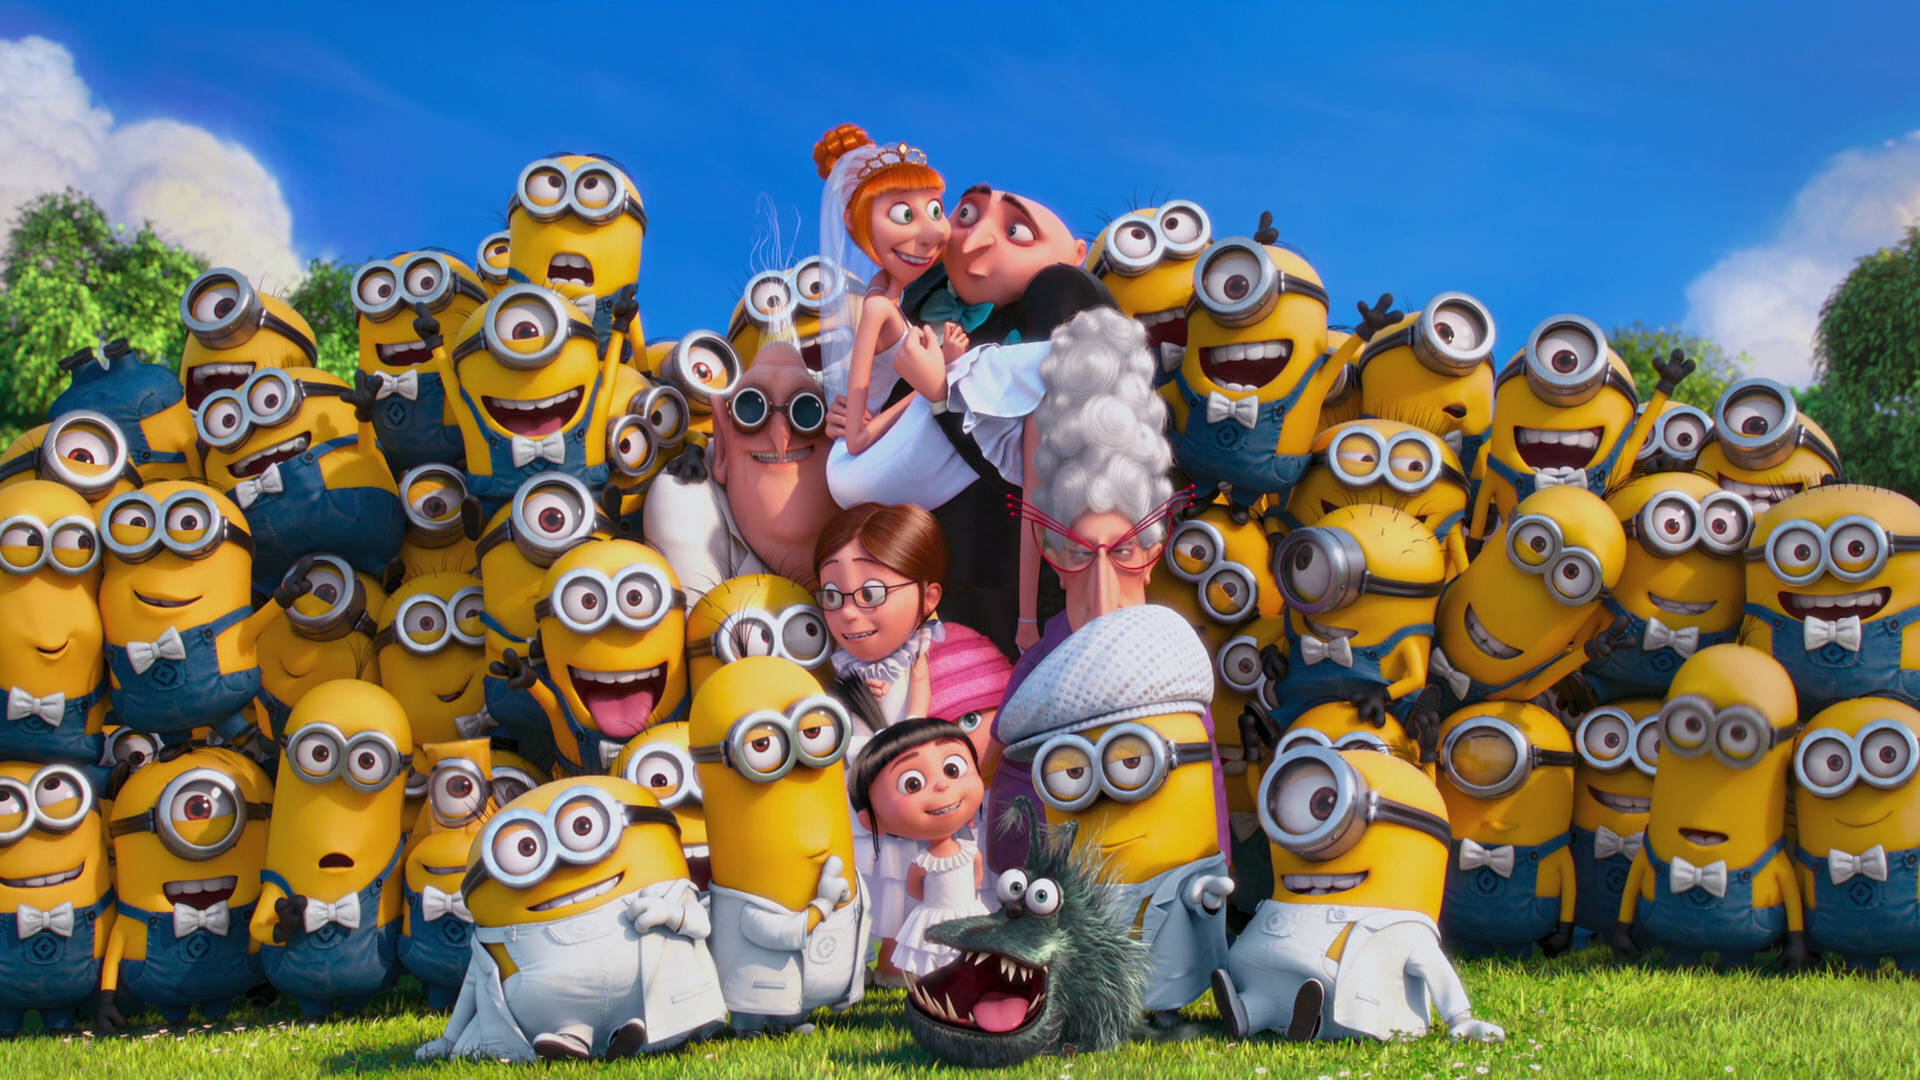 Despicable Me Wedding Family Picture wallpaper.